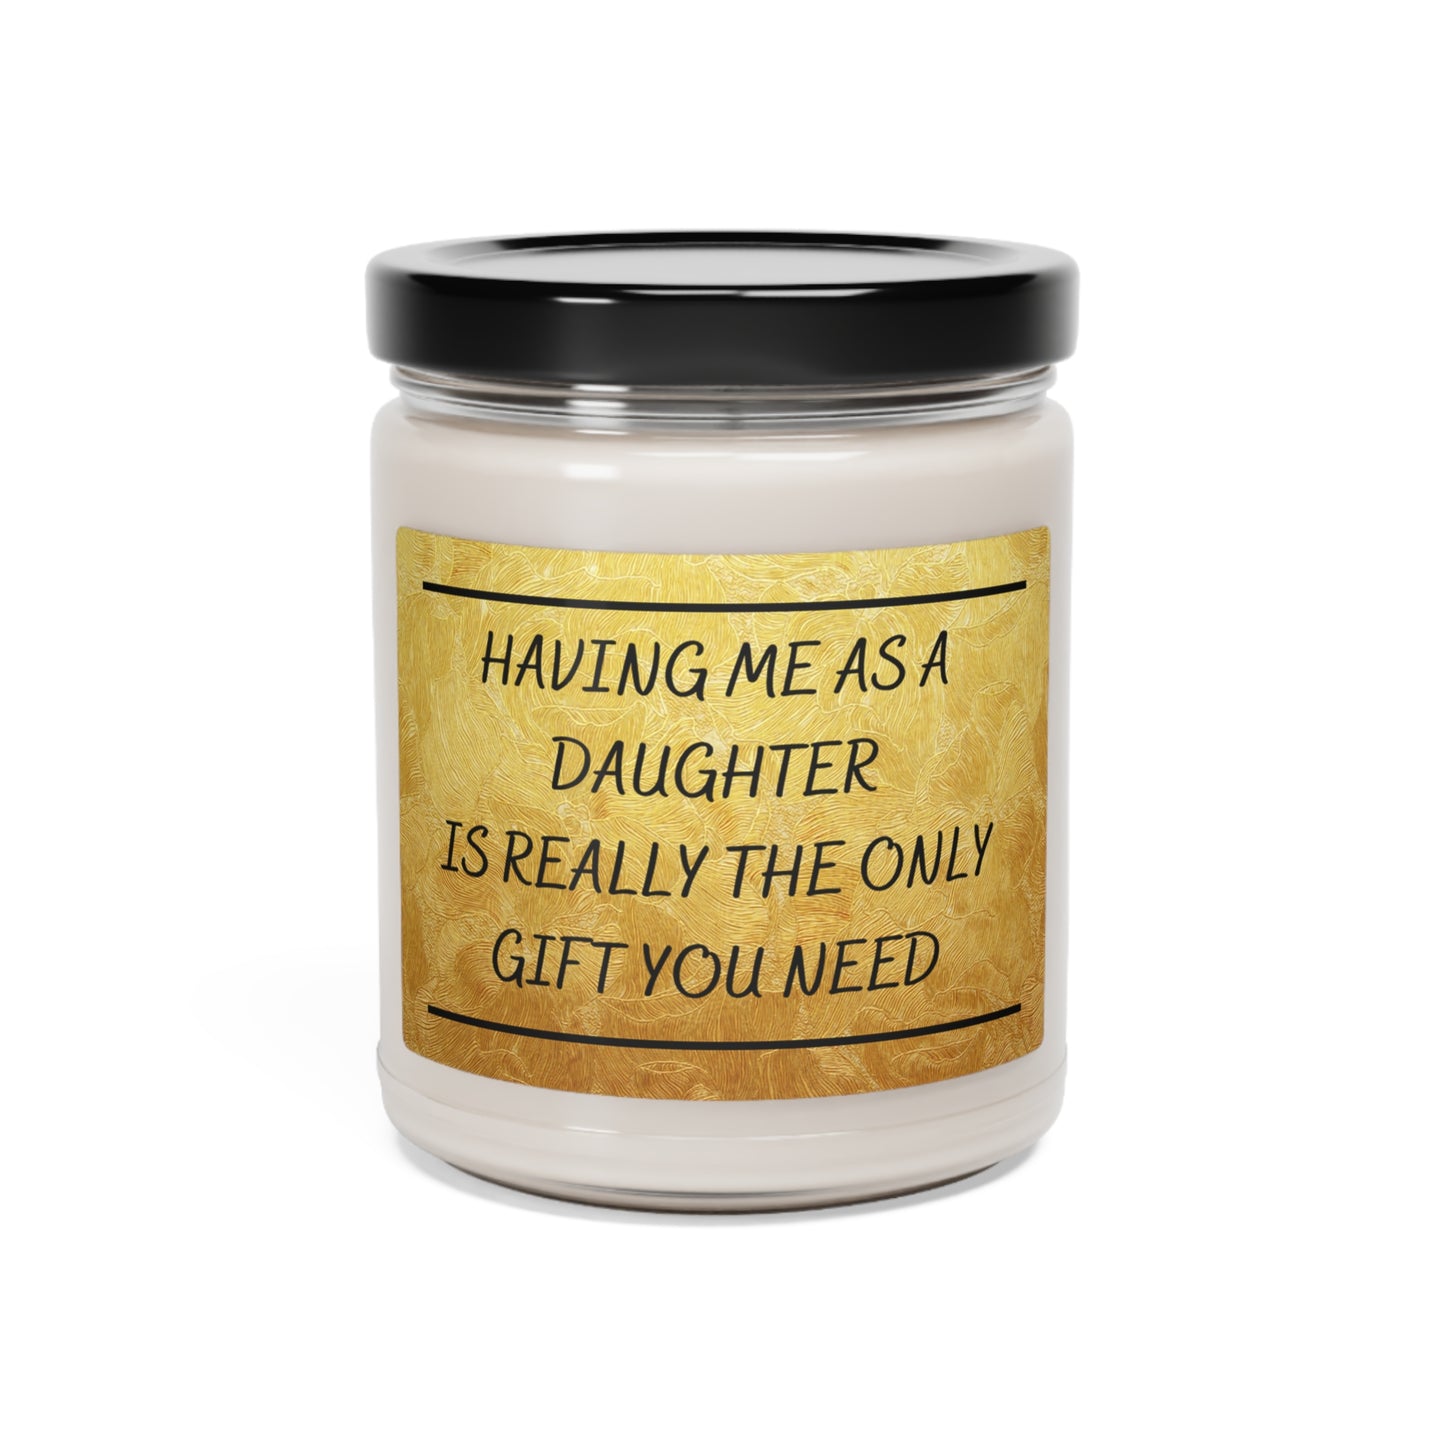 Scented Soy Candle, 9oz Having me as a daughter is the only gift you need.